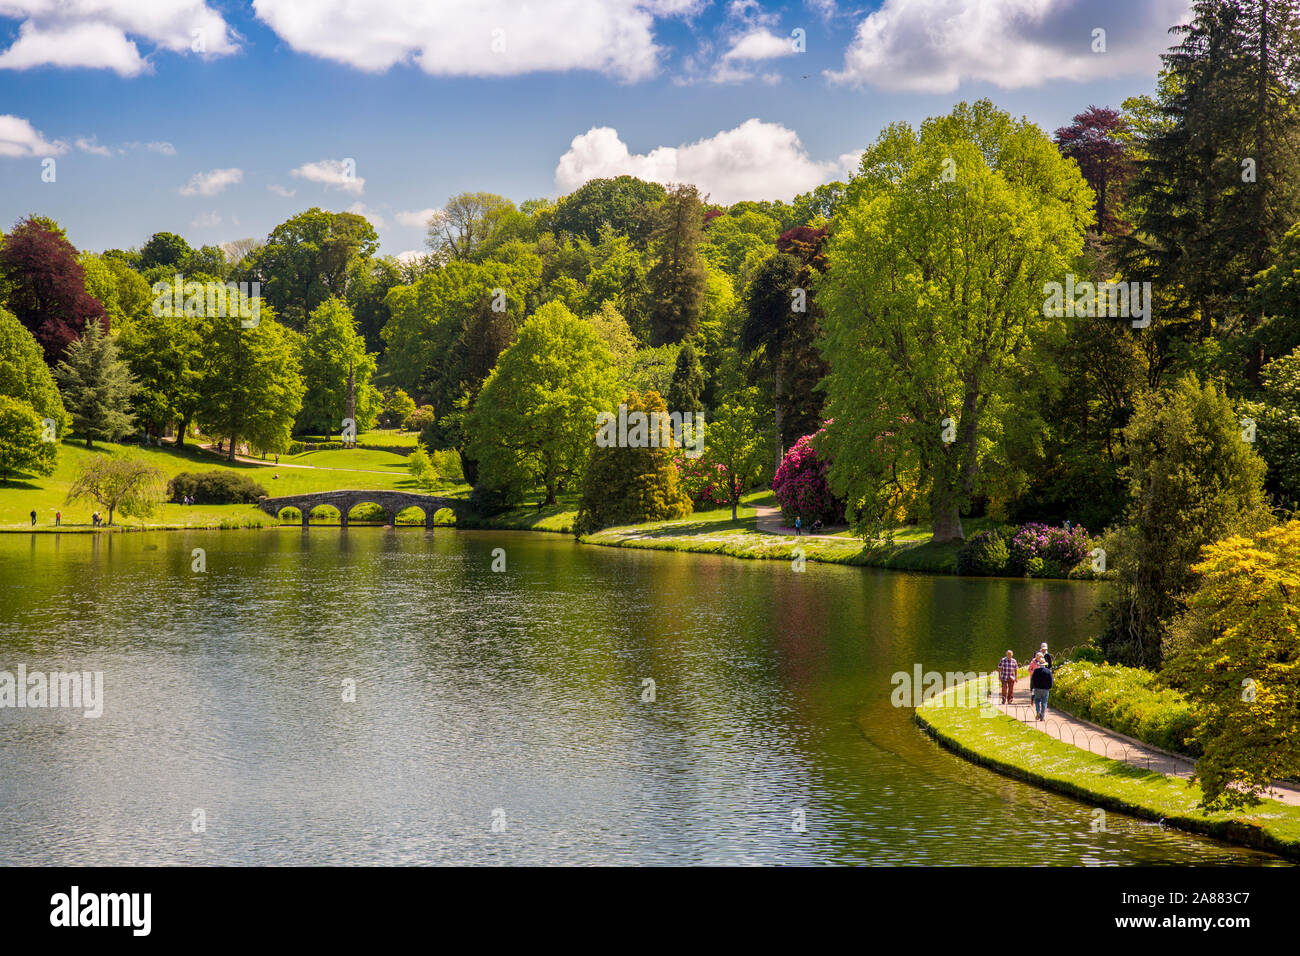 The Palladian Bridge and colourful rhododendron flowers in spring at Stourhead Gardens, Wiltshire, England, UK Stock Photo